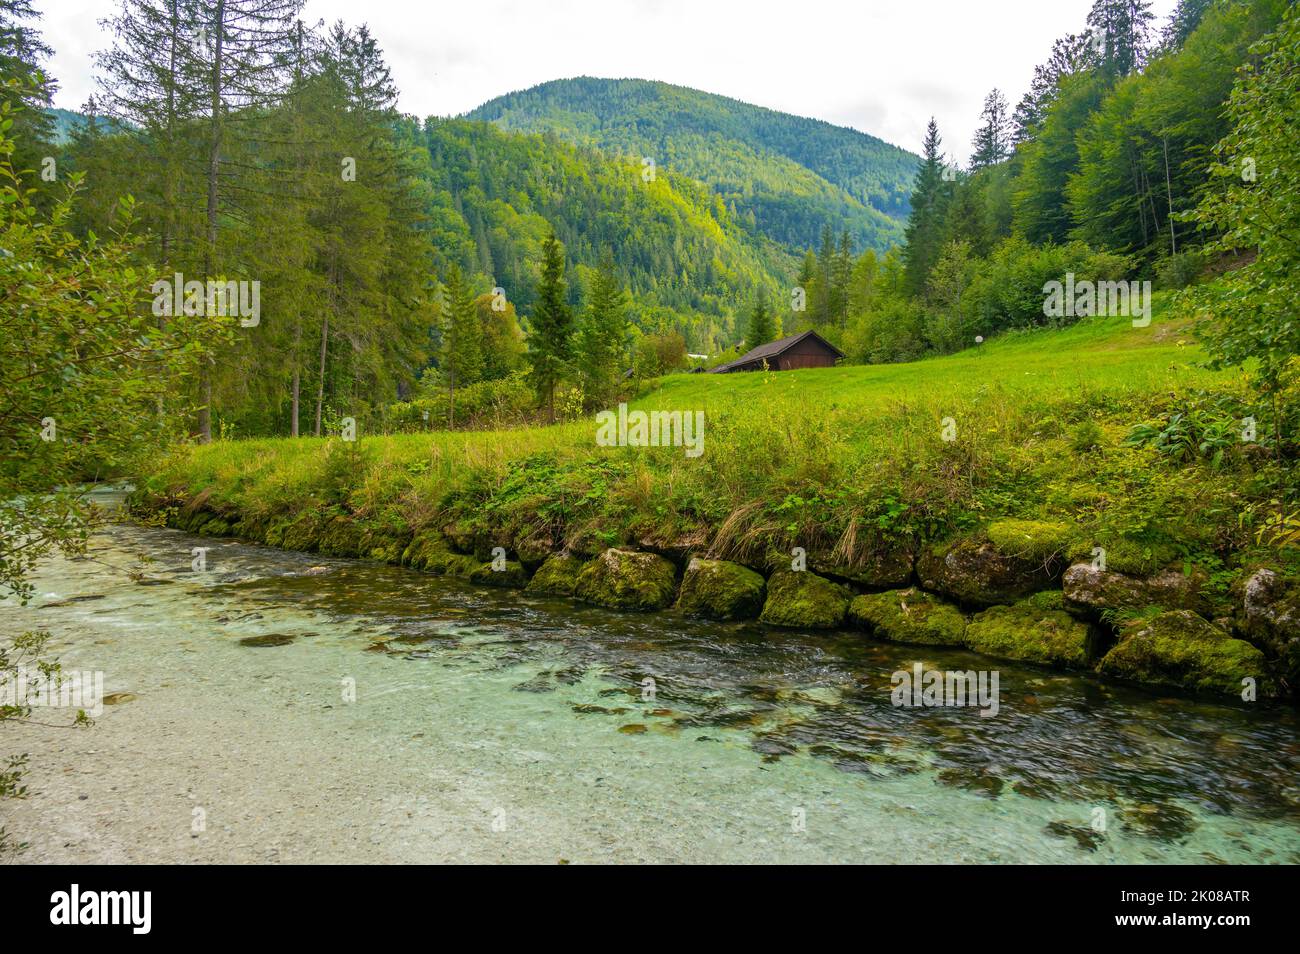 The Krumme Steyr river near the village Hinterstoder and famous lake Schiederweiher. Pure fresh water near Austrian Alps and mountains peaks. Soft col Stock Photo